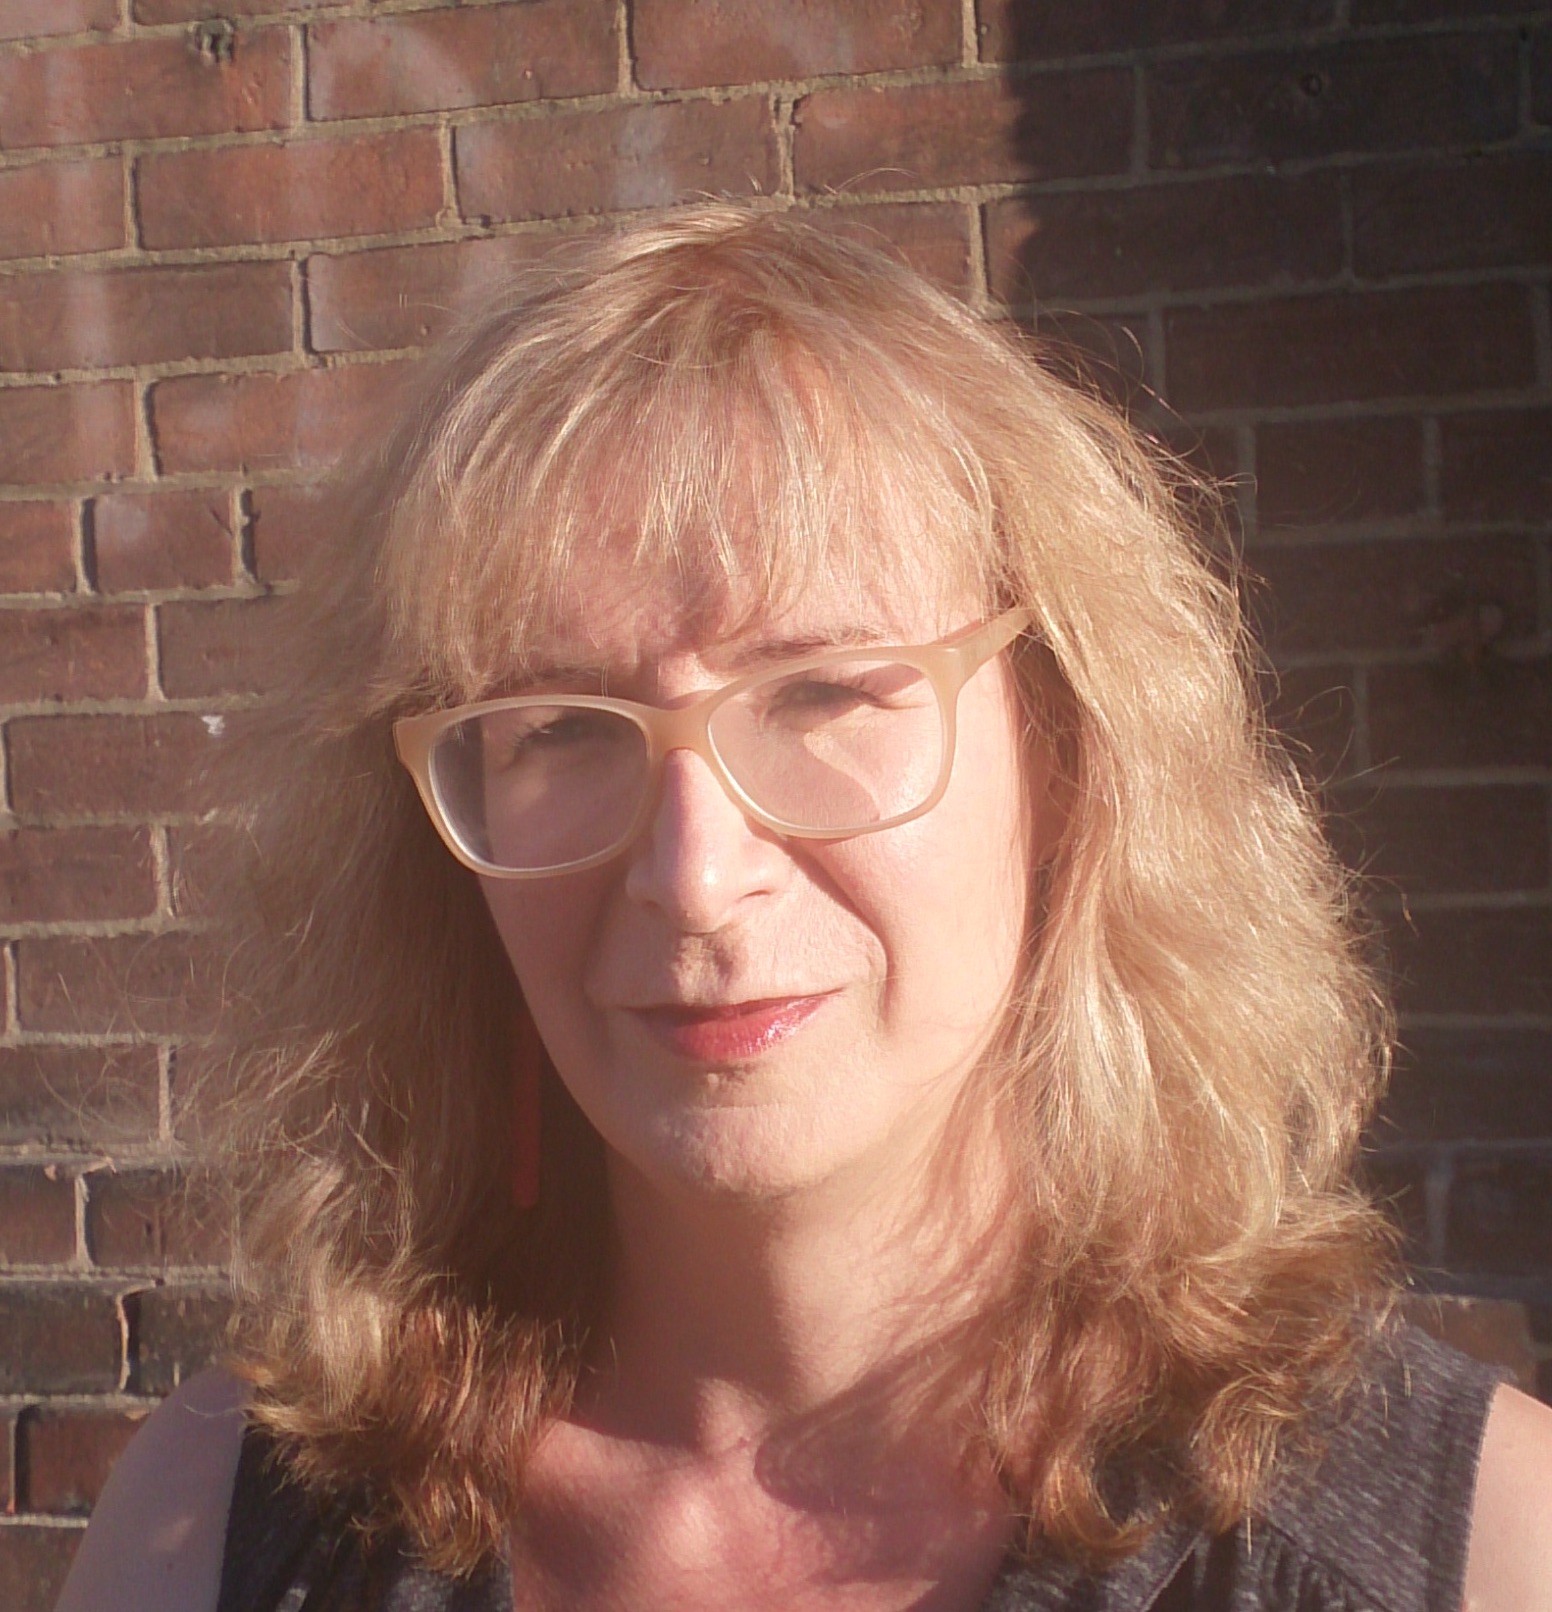 Trish Sala stands in the sun in front of a brick wall, wearing red lipstick and glasses